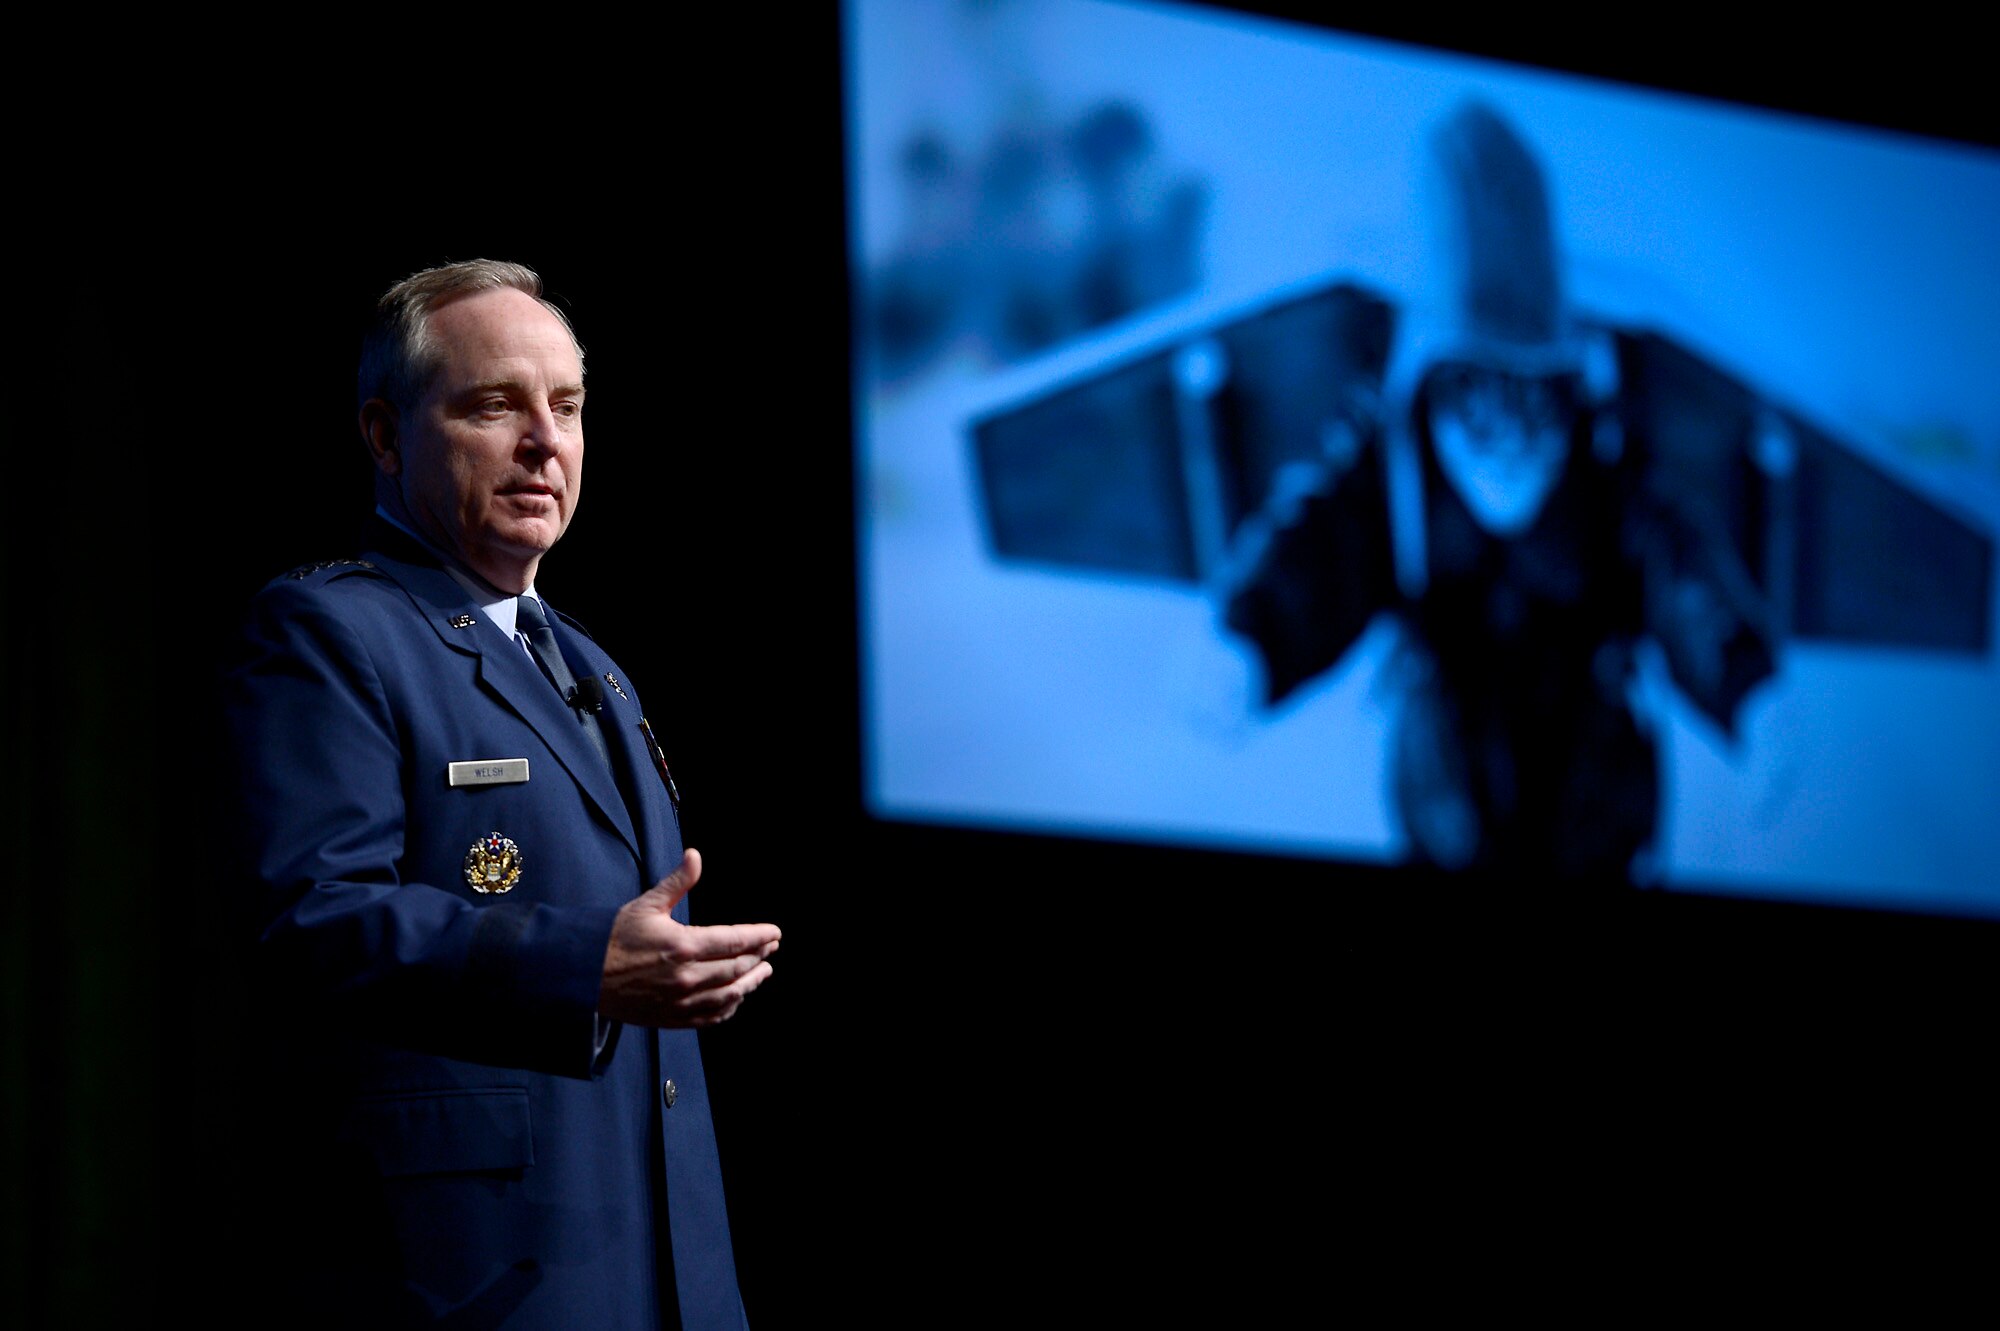 Air Force Chief of Staff Gen. Mark A. Welsh III delivers his 'Air Force Update' to attendees of the Air Force Association's annual Air Warfare Symposium and Technology Exposition Feb. 12, 2015, in Orlando, Fla. One of Welsh's points was that we need to continue on a path of innovation. (U.S. Air Force photo/Scott M. Ash)